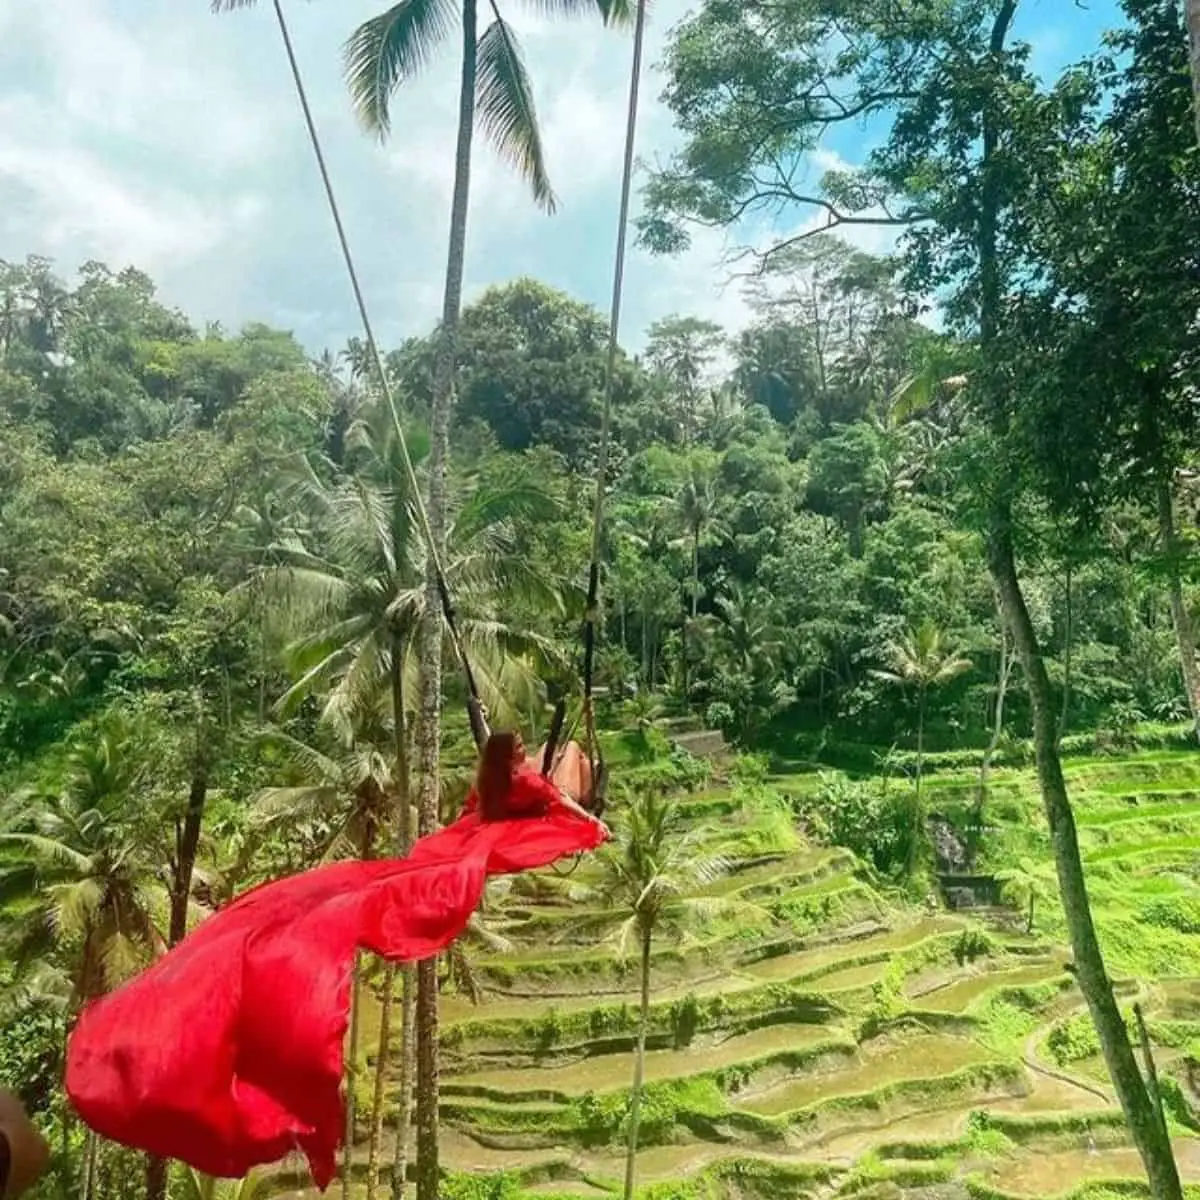 The beautiful view of Tegalalang Rice terraces with a swinging woman in a red long trail dress